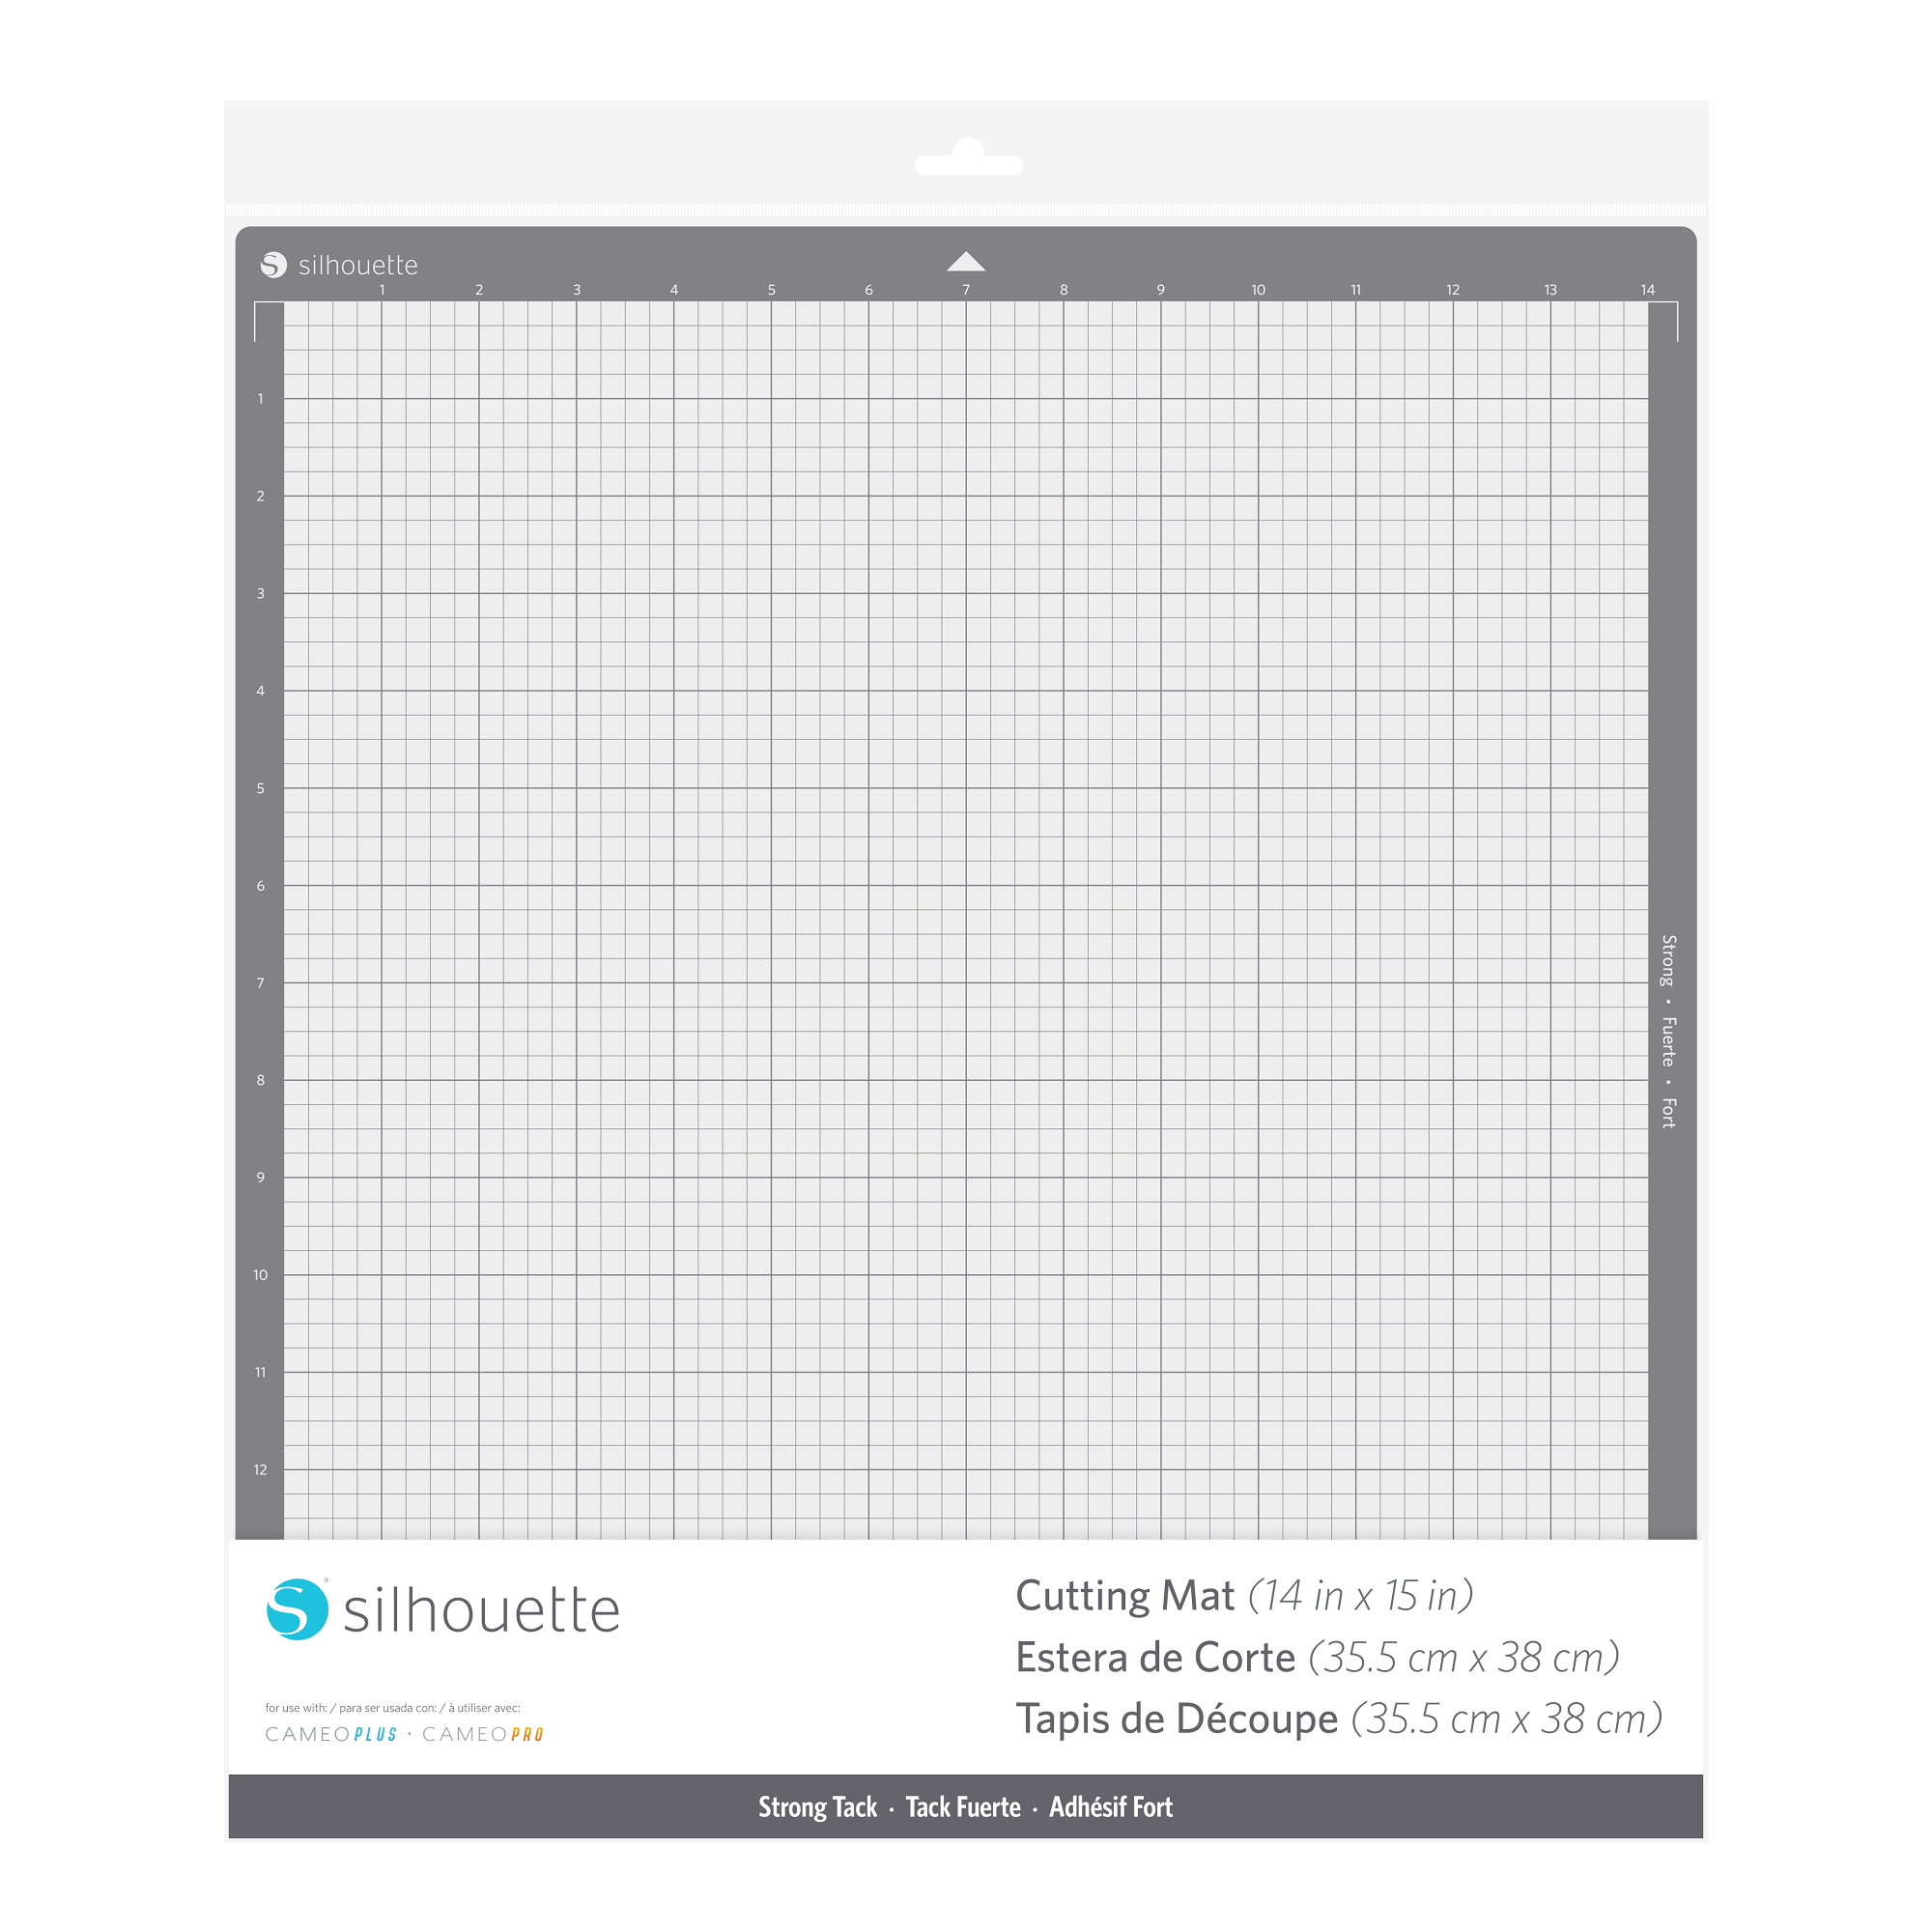 Silhouette Cameo Plus 15 Cutting Mat (Strong Tack)